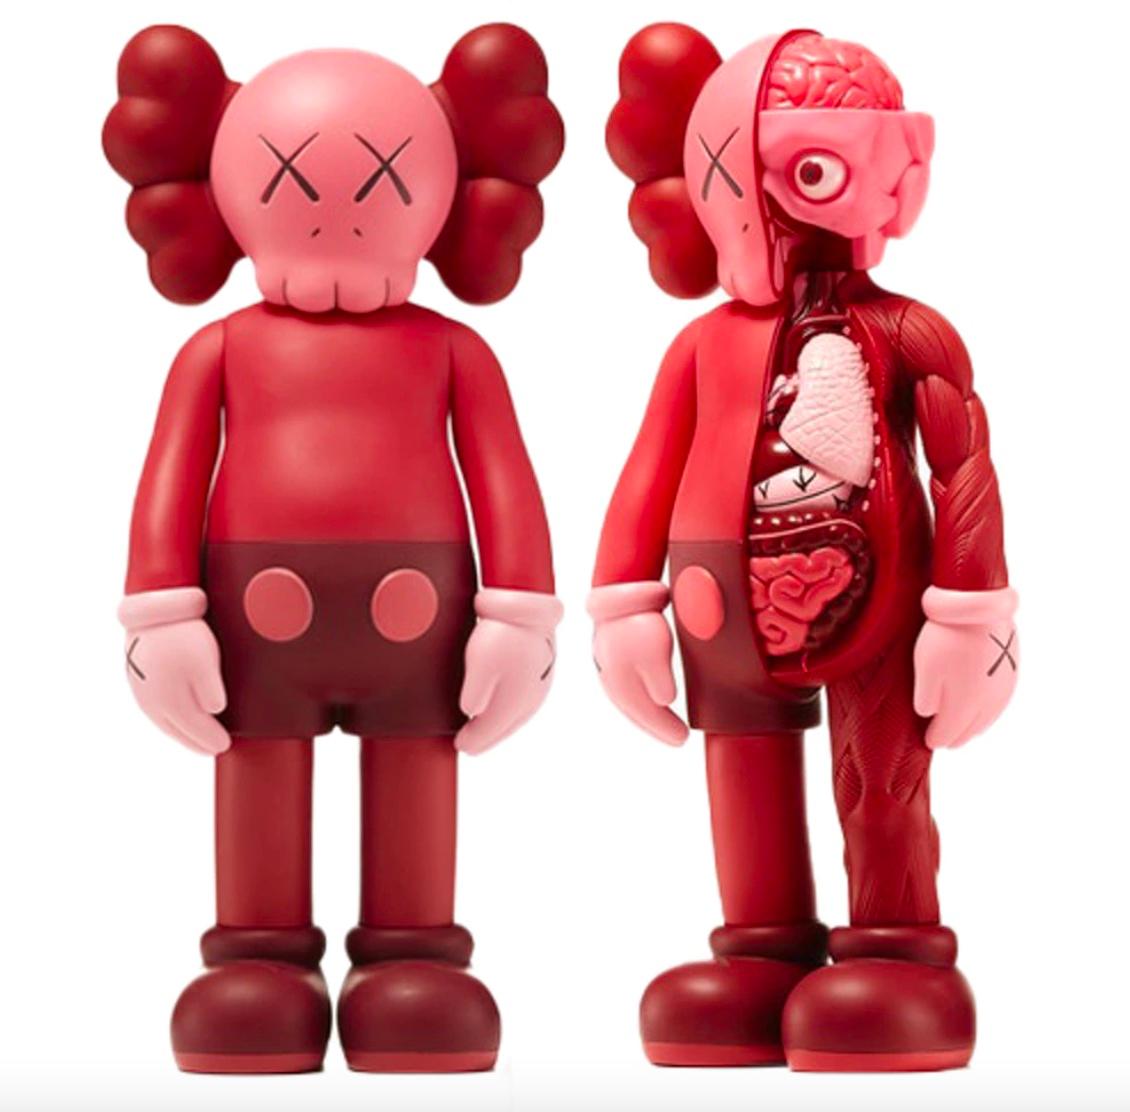 This is a brand new, in its original packaged, never open. Perfect condition. 

KAWS's cartoonish style—including his best-known characters with X-ed out eyes—has its roots in his early career as a street artist, when he began replacing